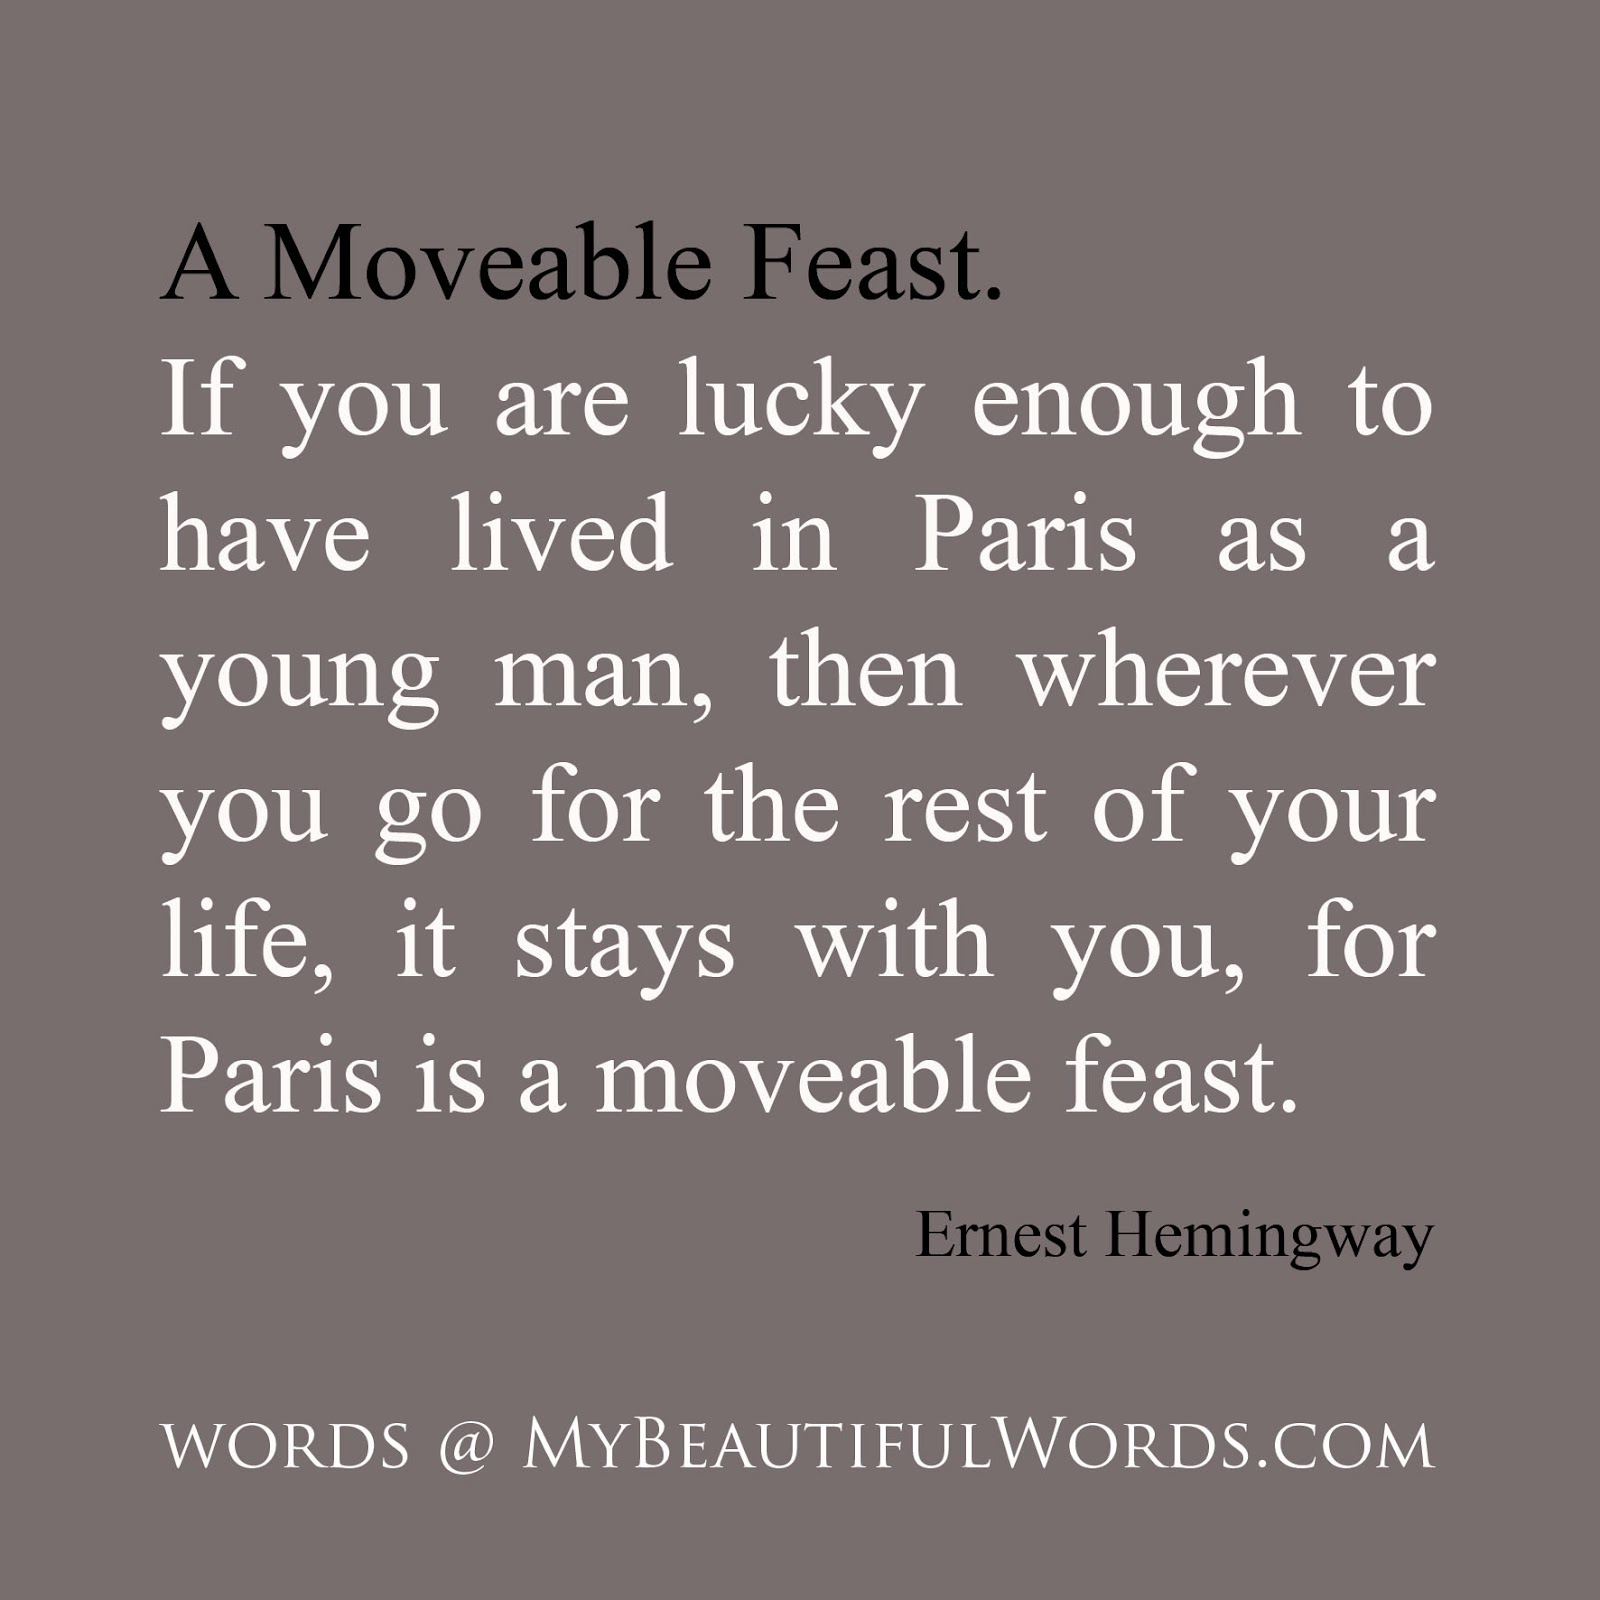 Hemingway Quotes On Love Bronas Books A Moveable Feasternest Hemingway